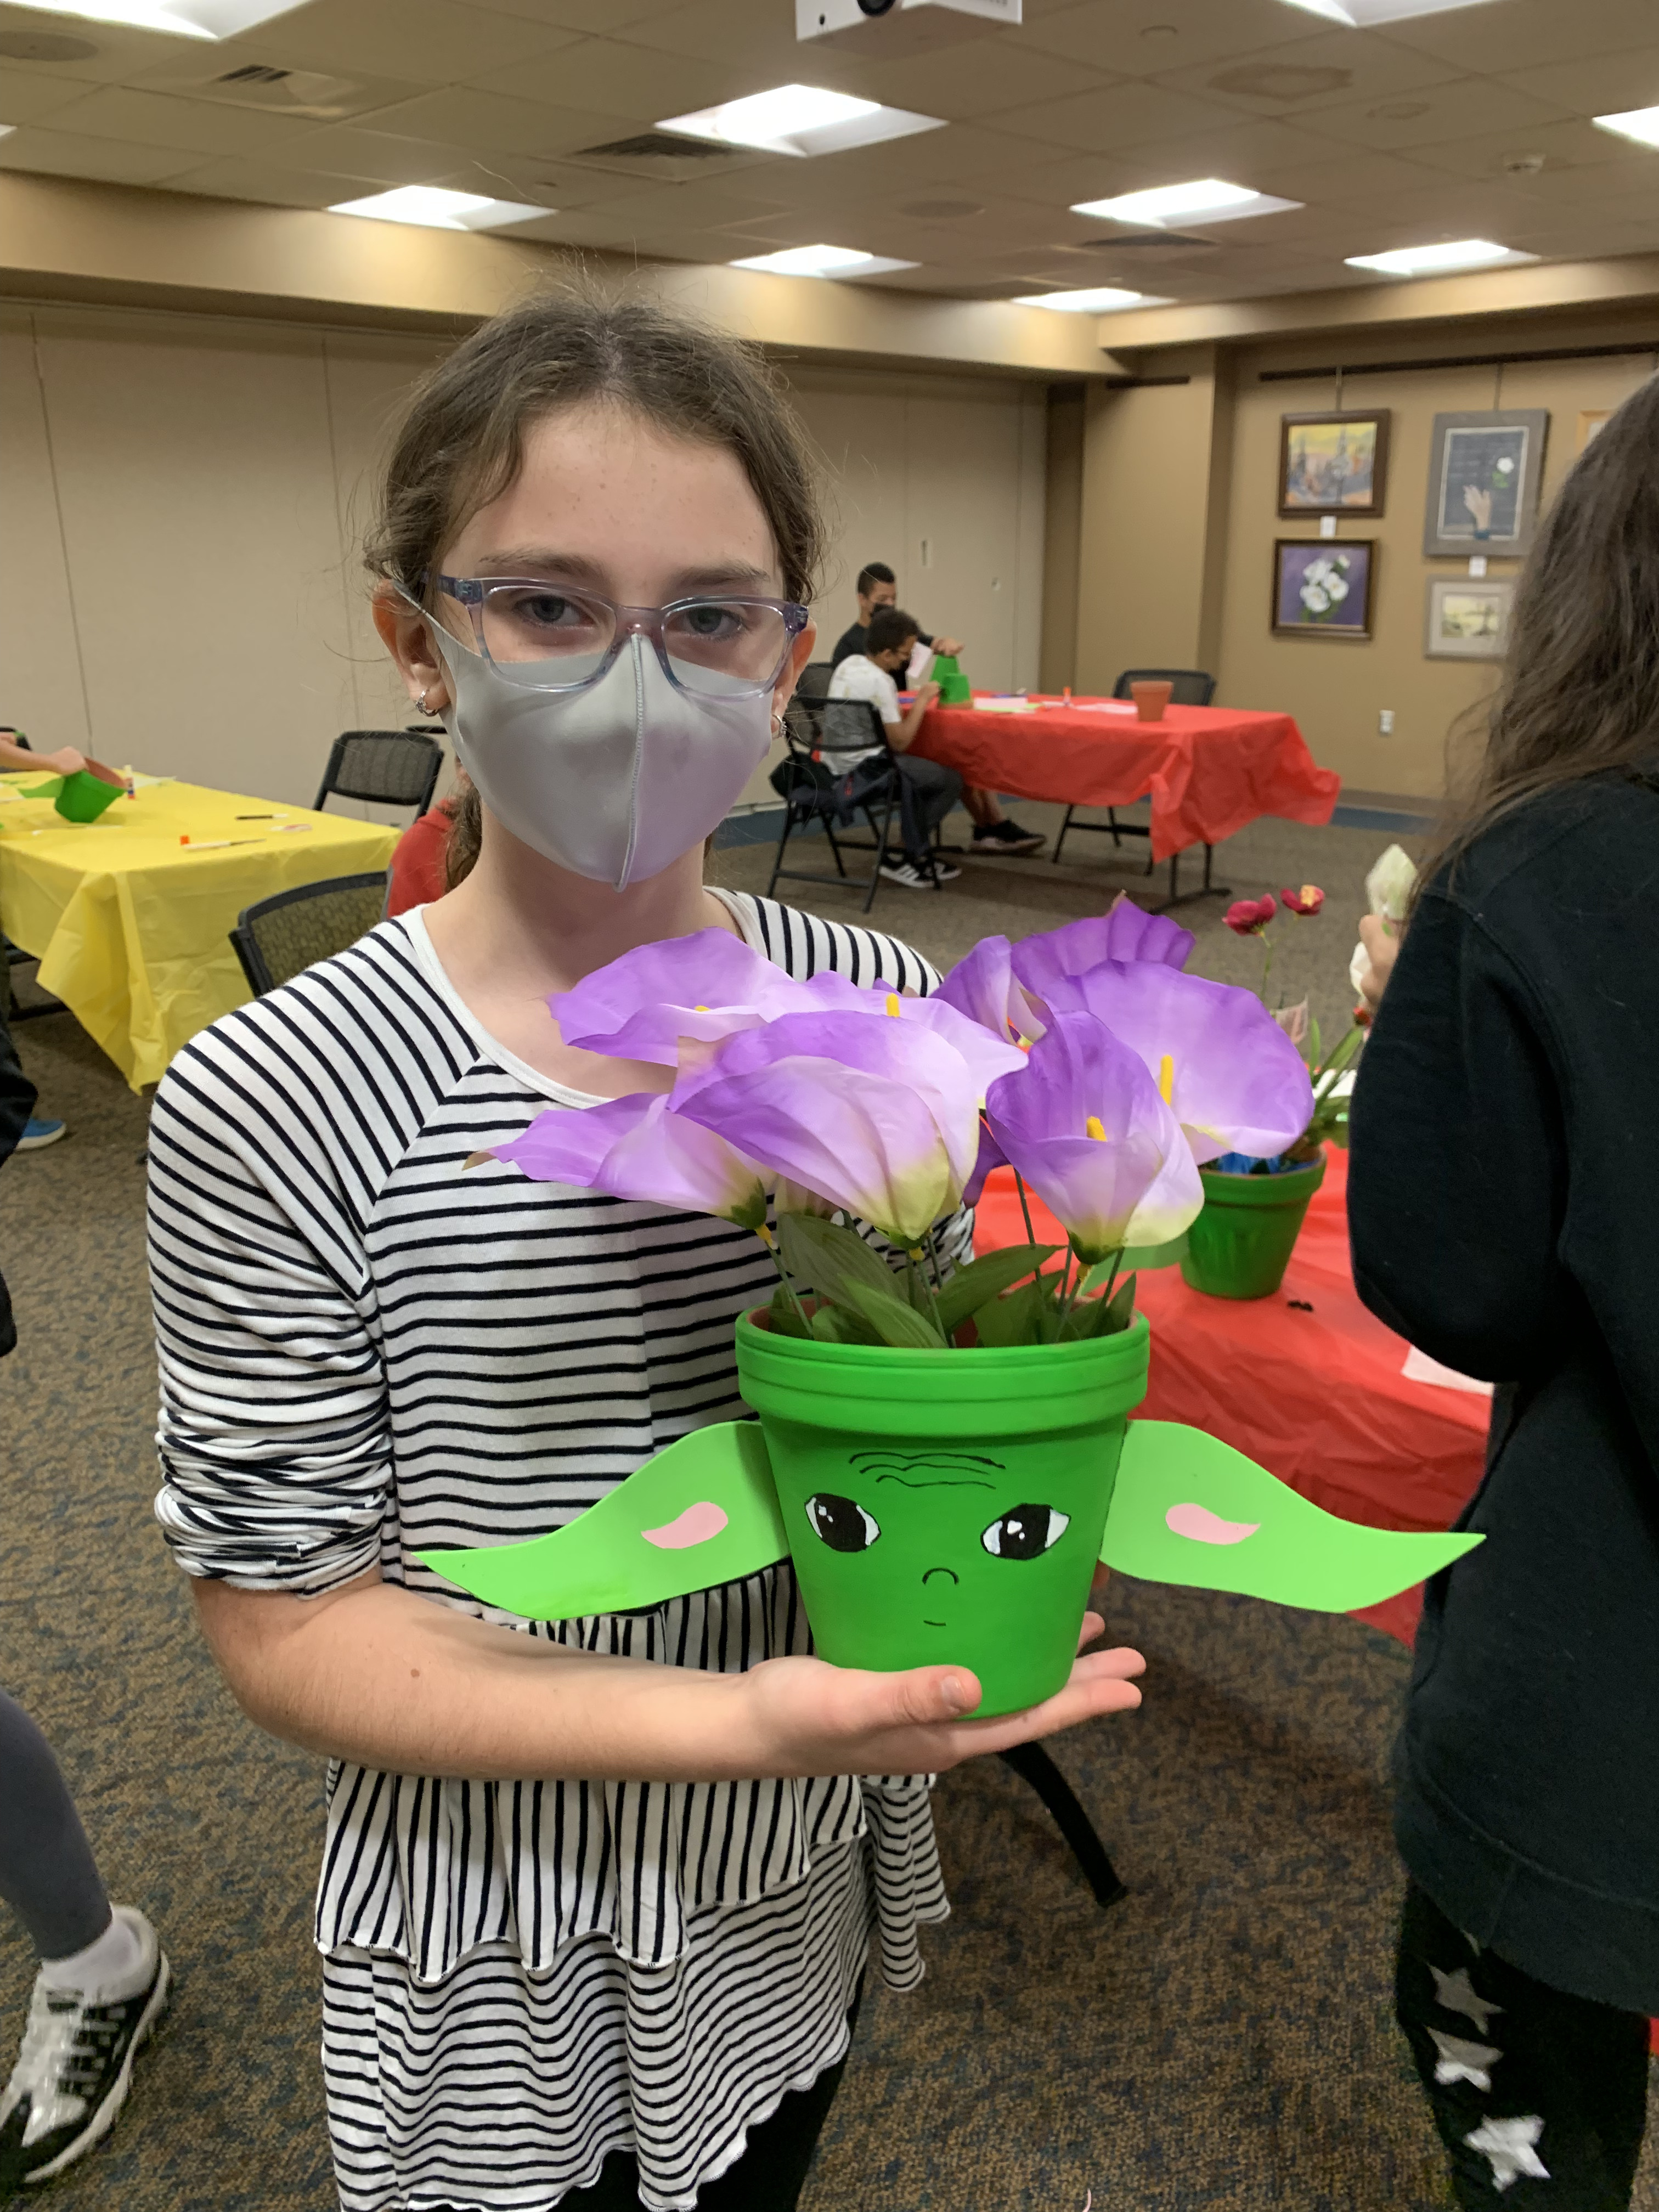 SmithCon image showing a young girl holding her baby Yoda planter that she created